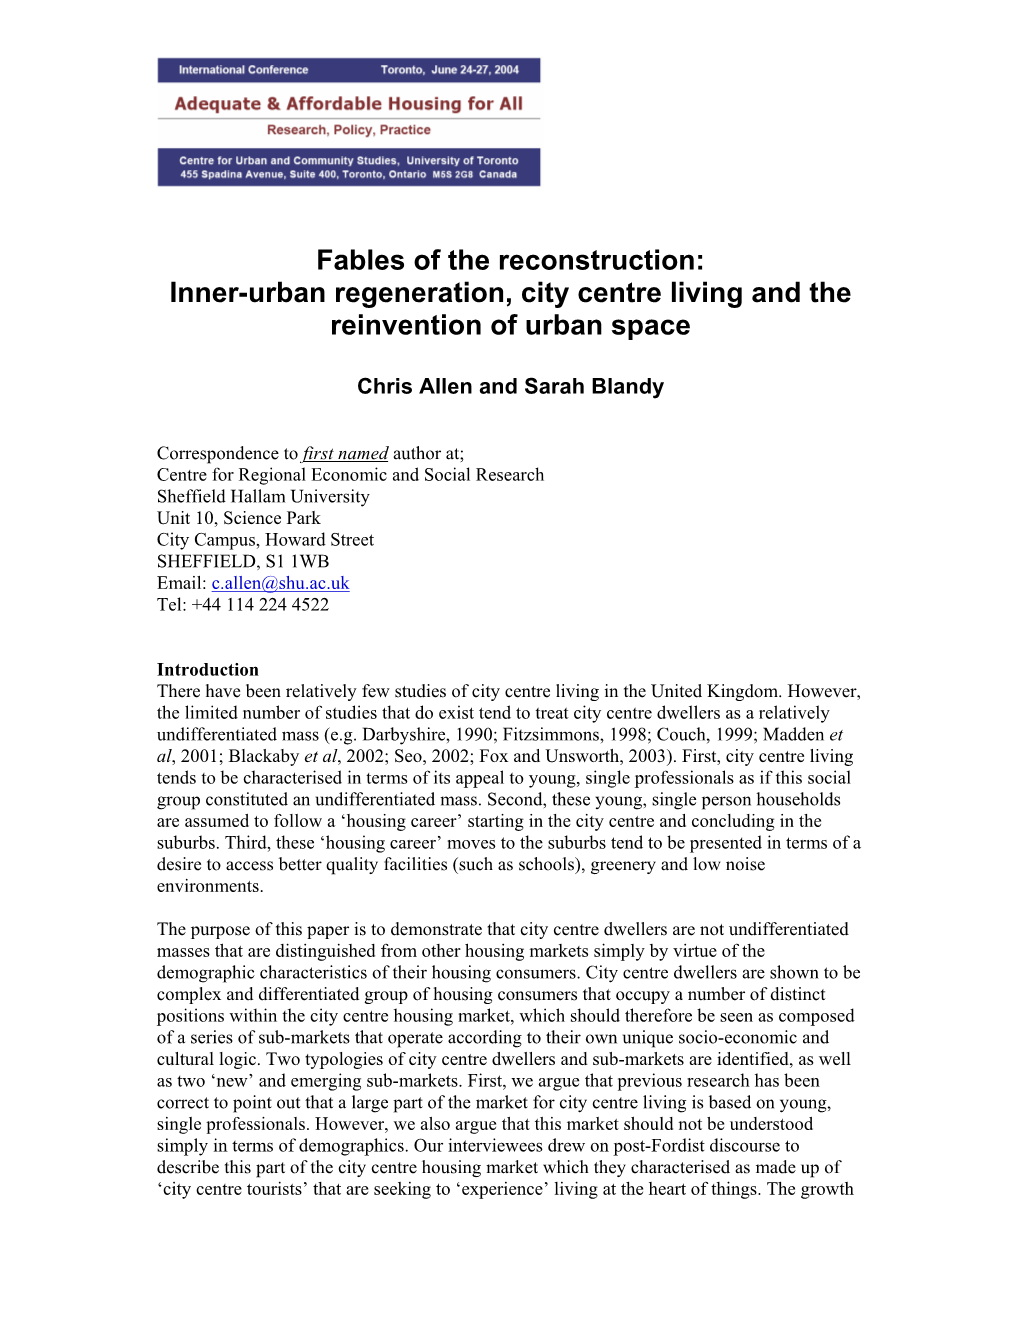 Fables of the Reconstruction: Inner-Urban Regeneration, City Centre Living and the Reinvention of Urban Space